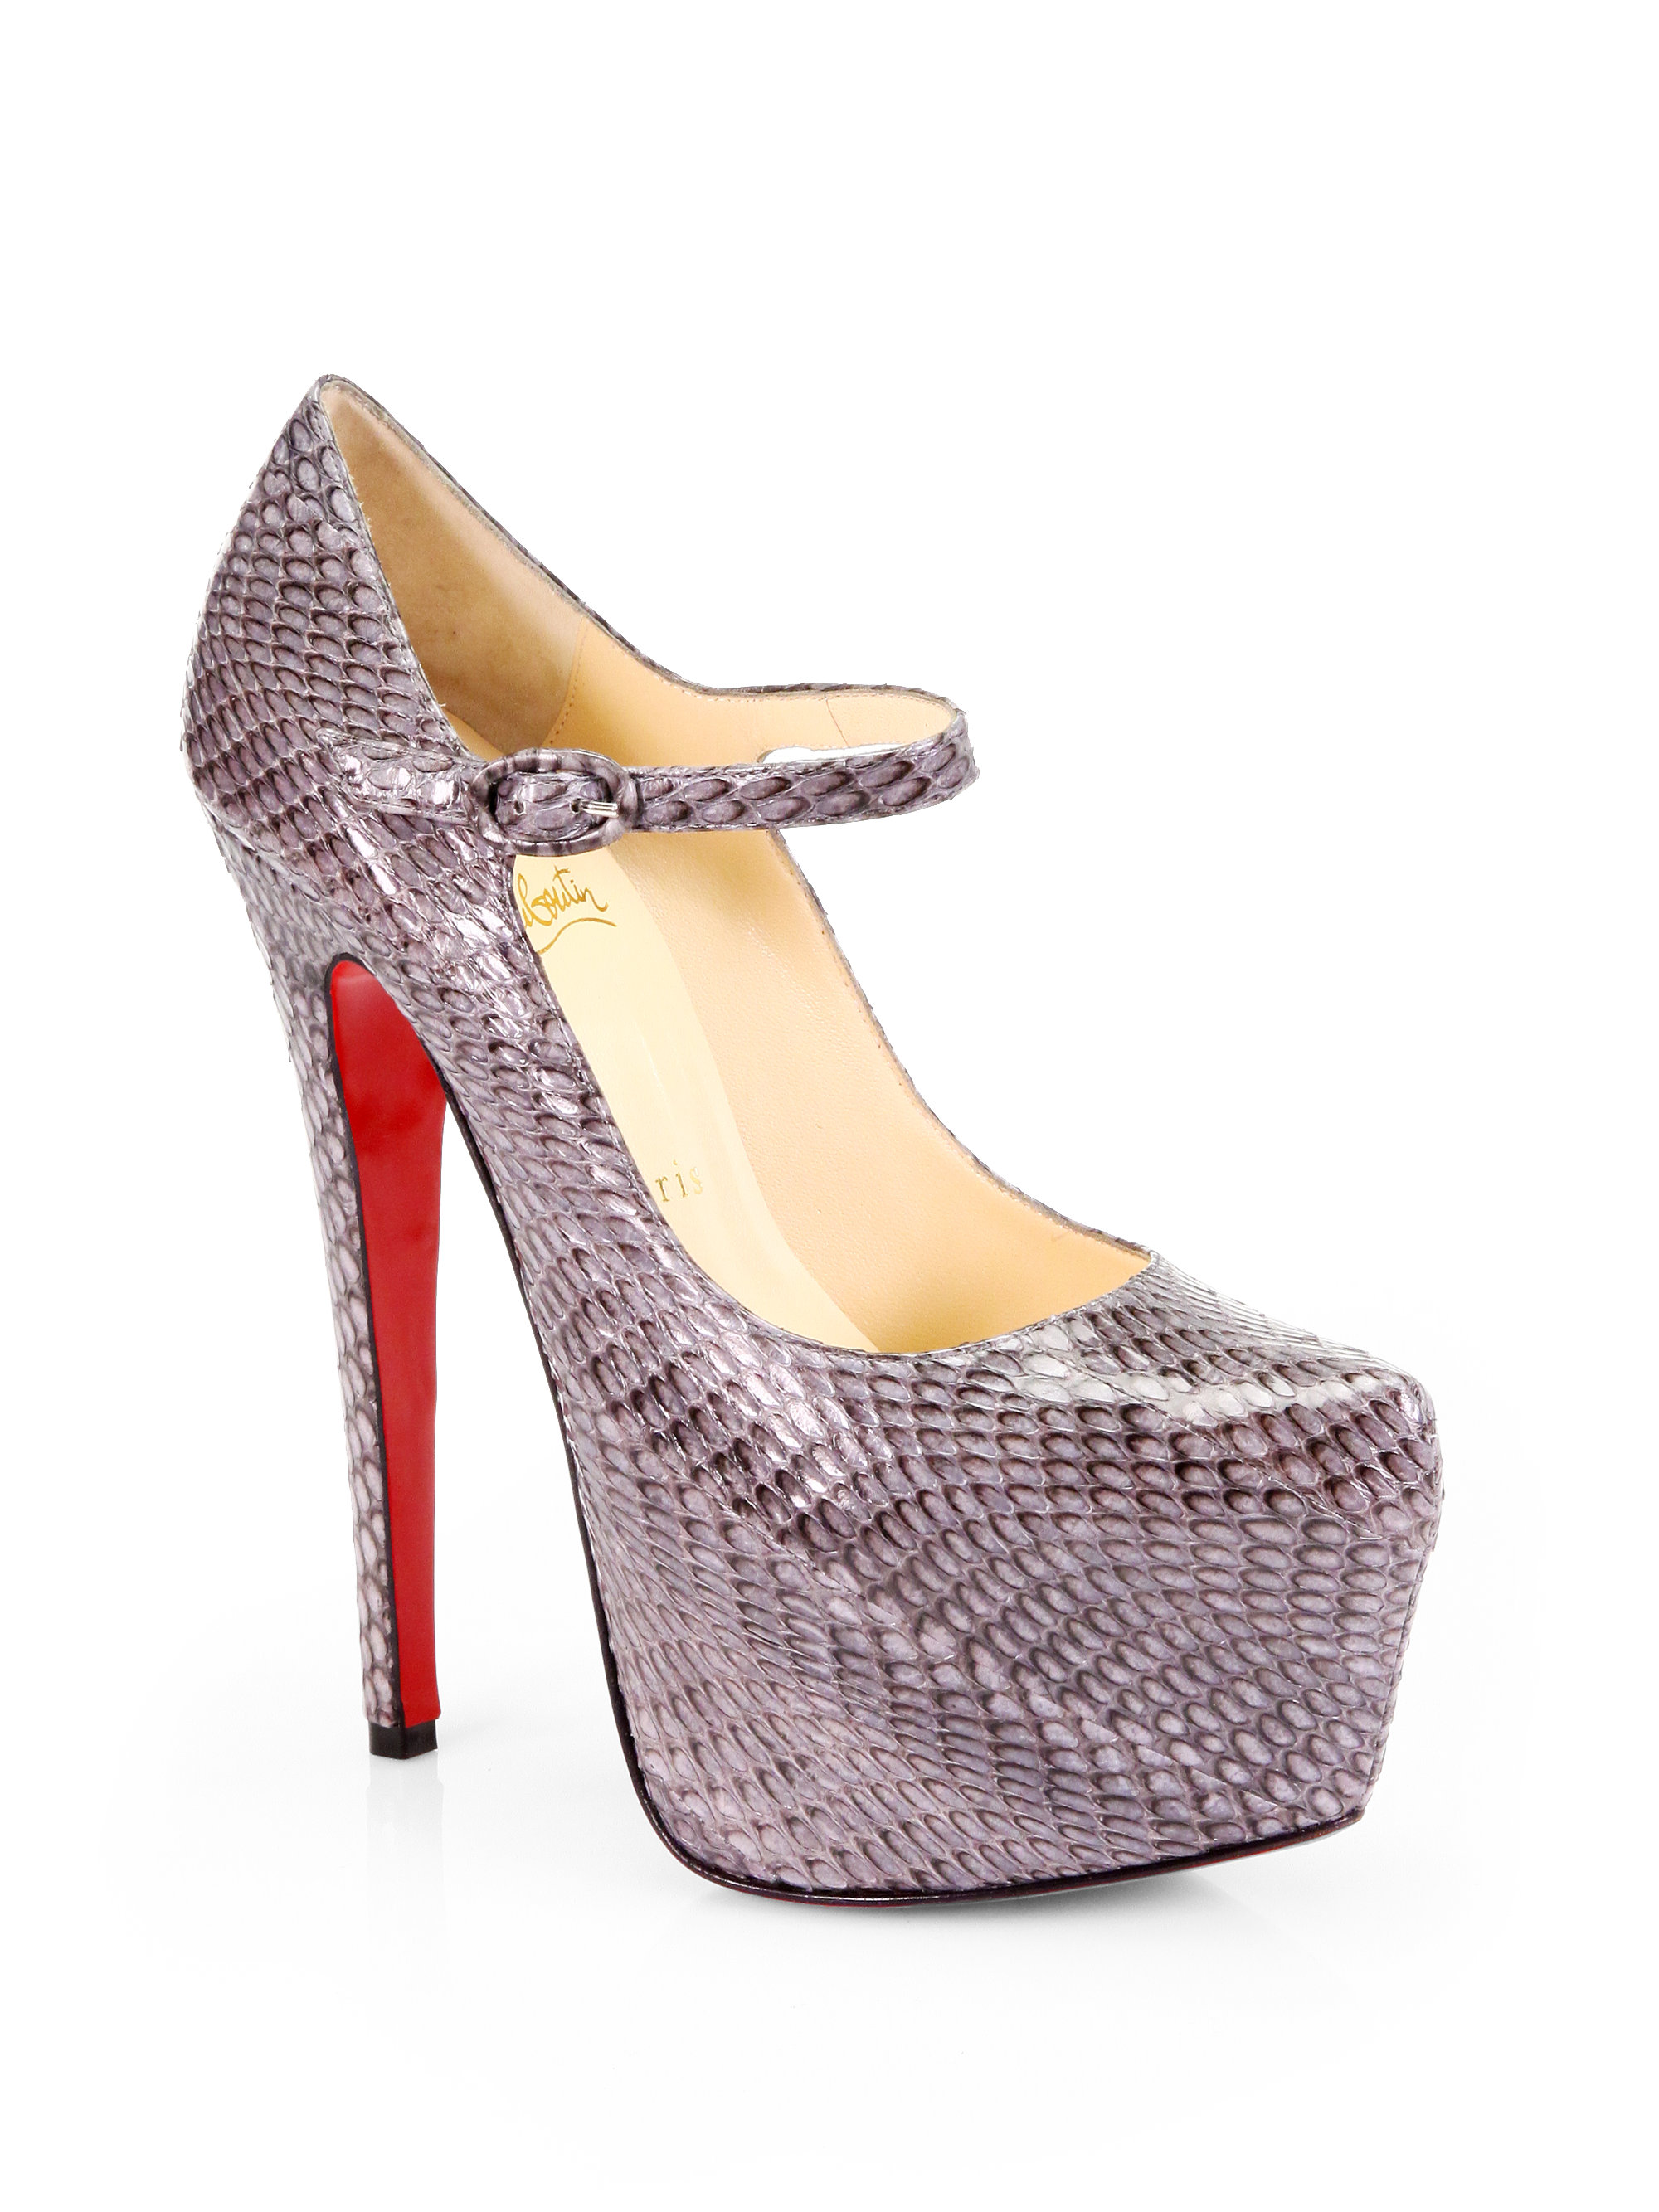 Lyst - Christian louboutin Lady Daf 160 Cobra Mary Jane Pumps in Gray